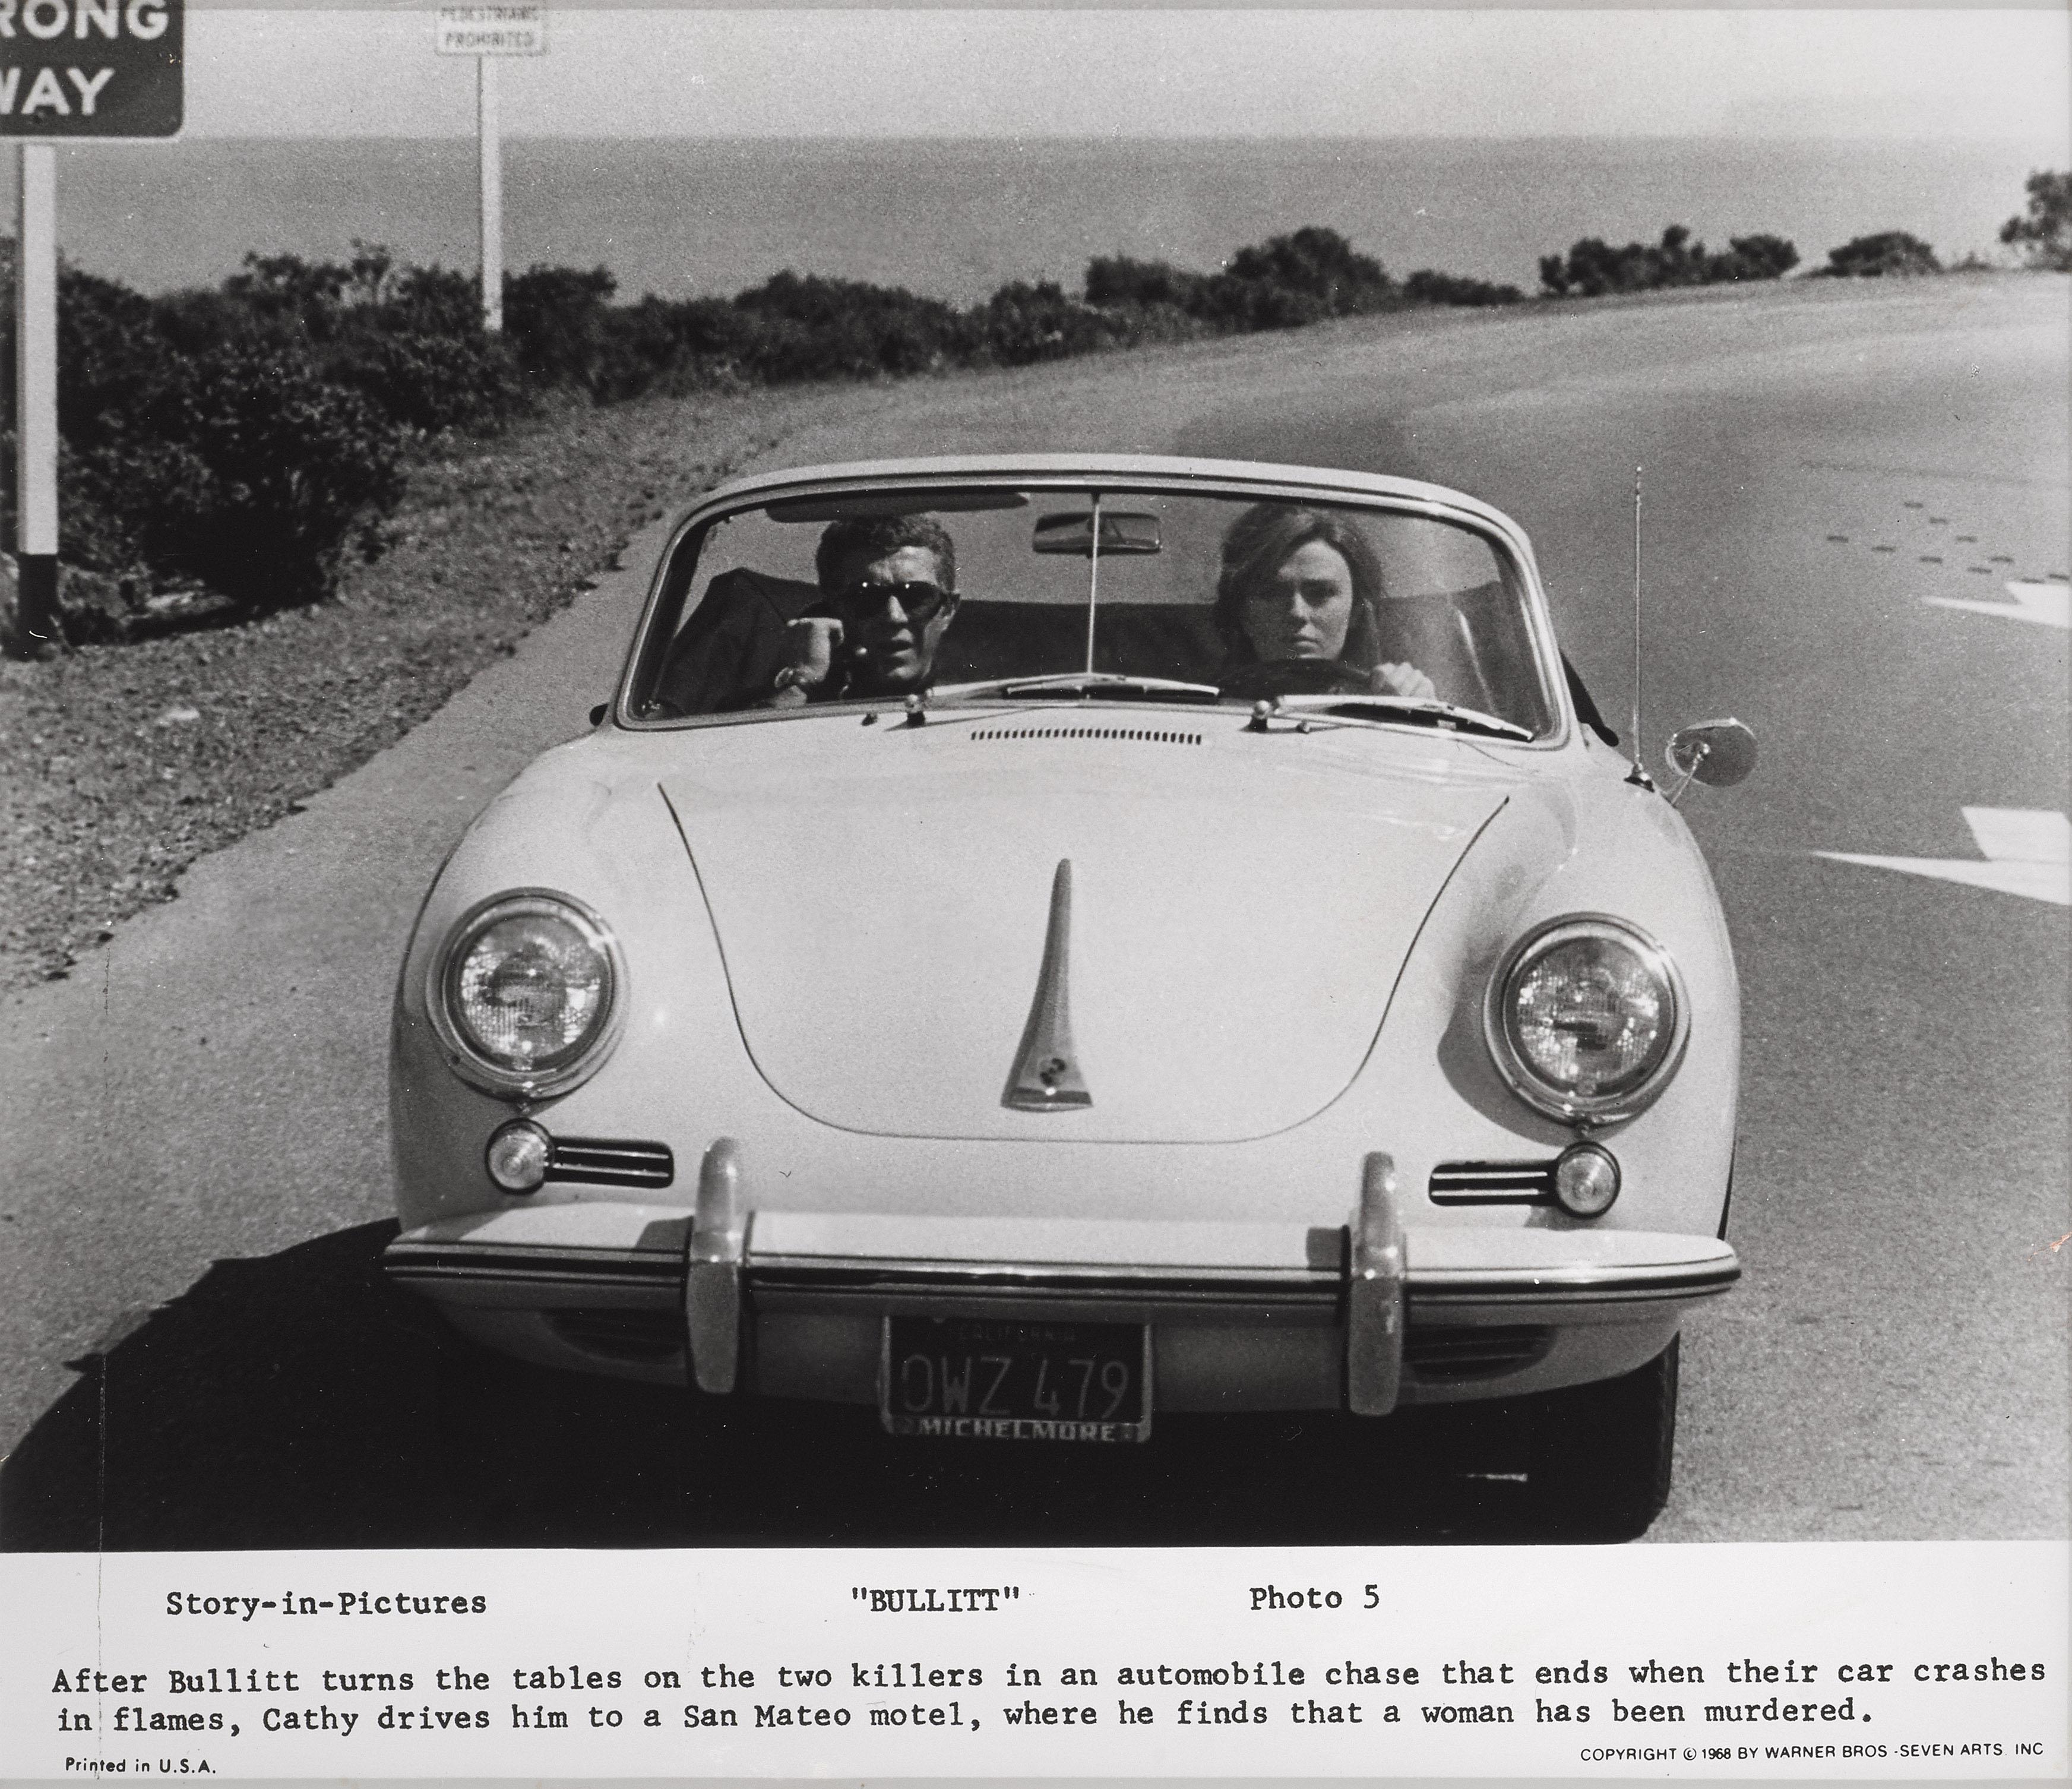 Original US production still for the Steve McQueen's 1968 film Bullitt. This production features the Porsche 356C.
This piece is conservation framed with UV plexiglass in a Tulip wood frame with acid free card mounts.
The size given is before